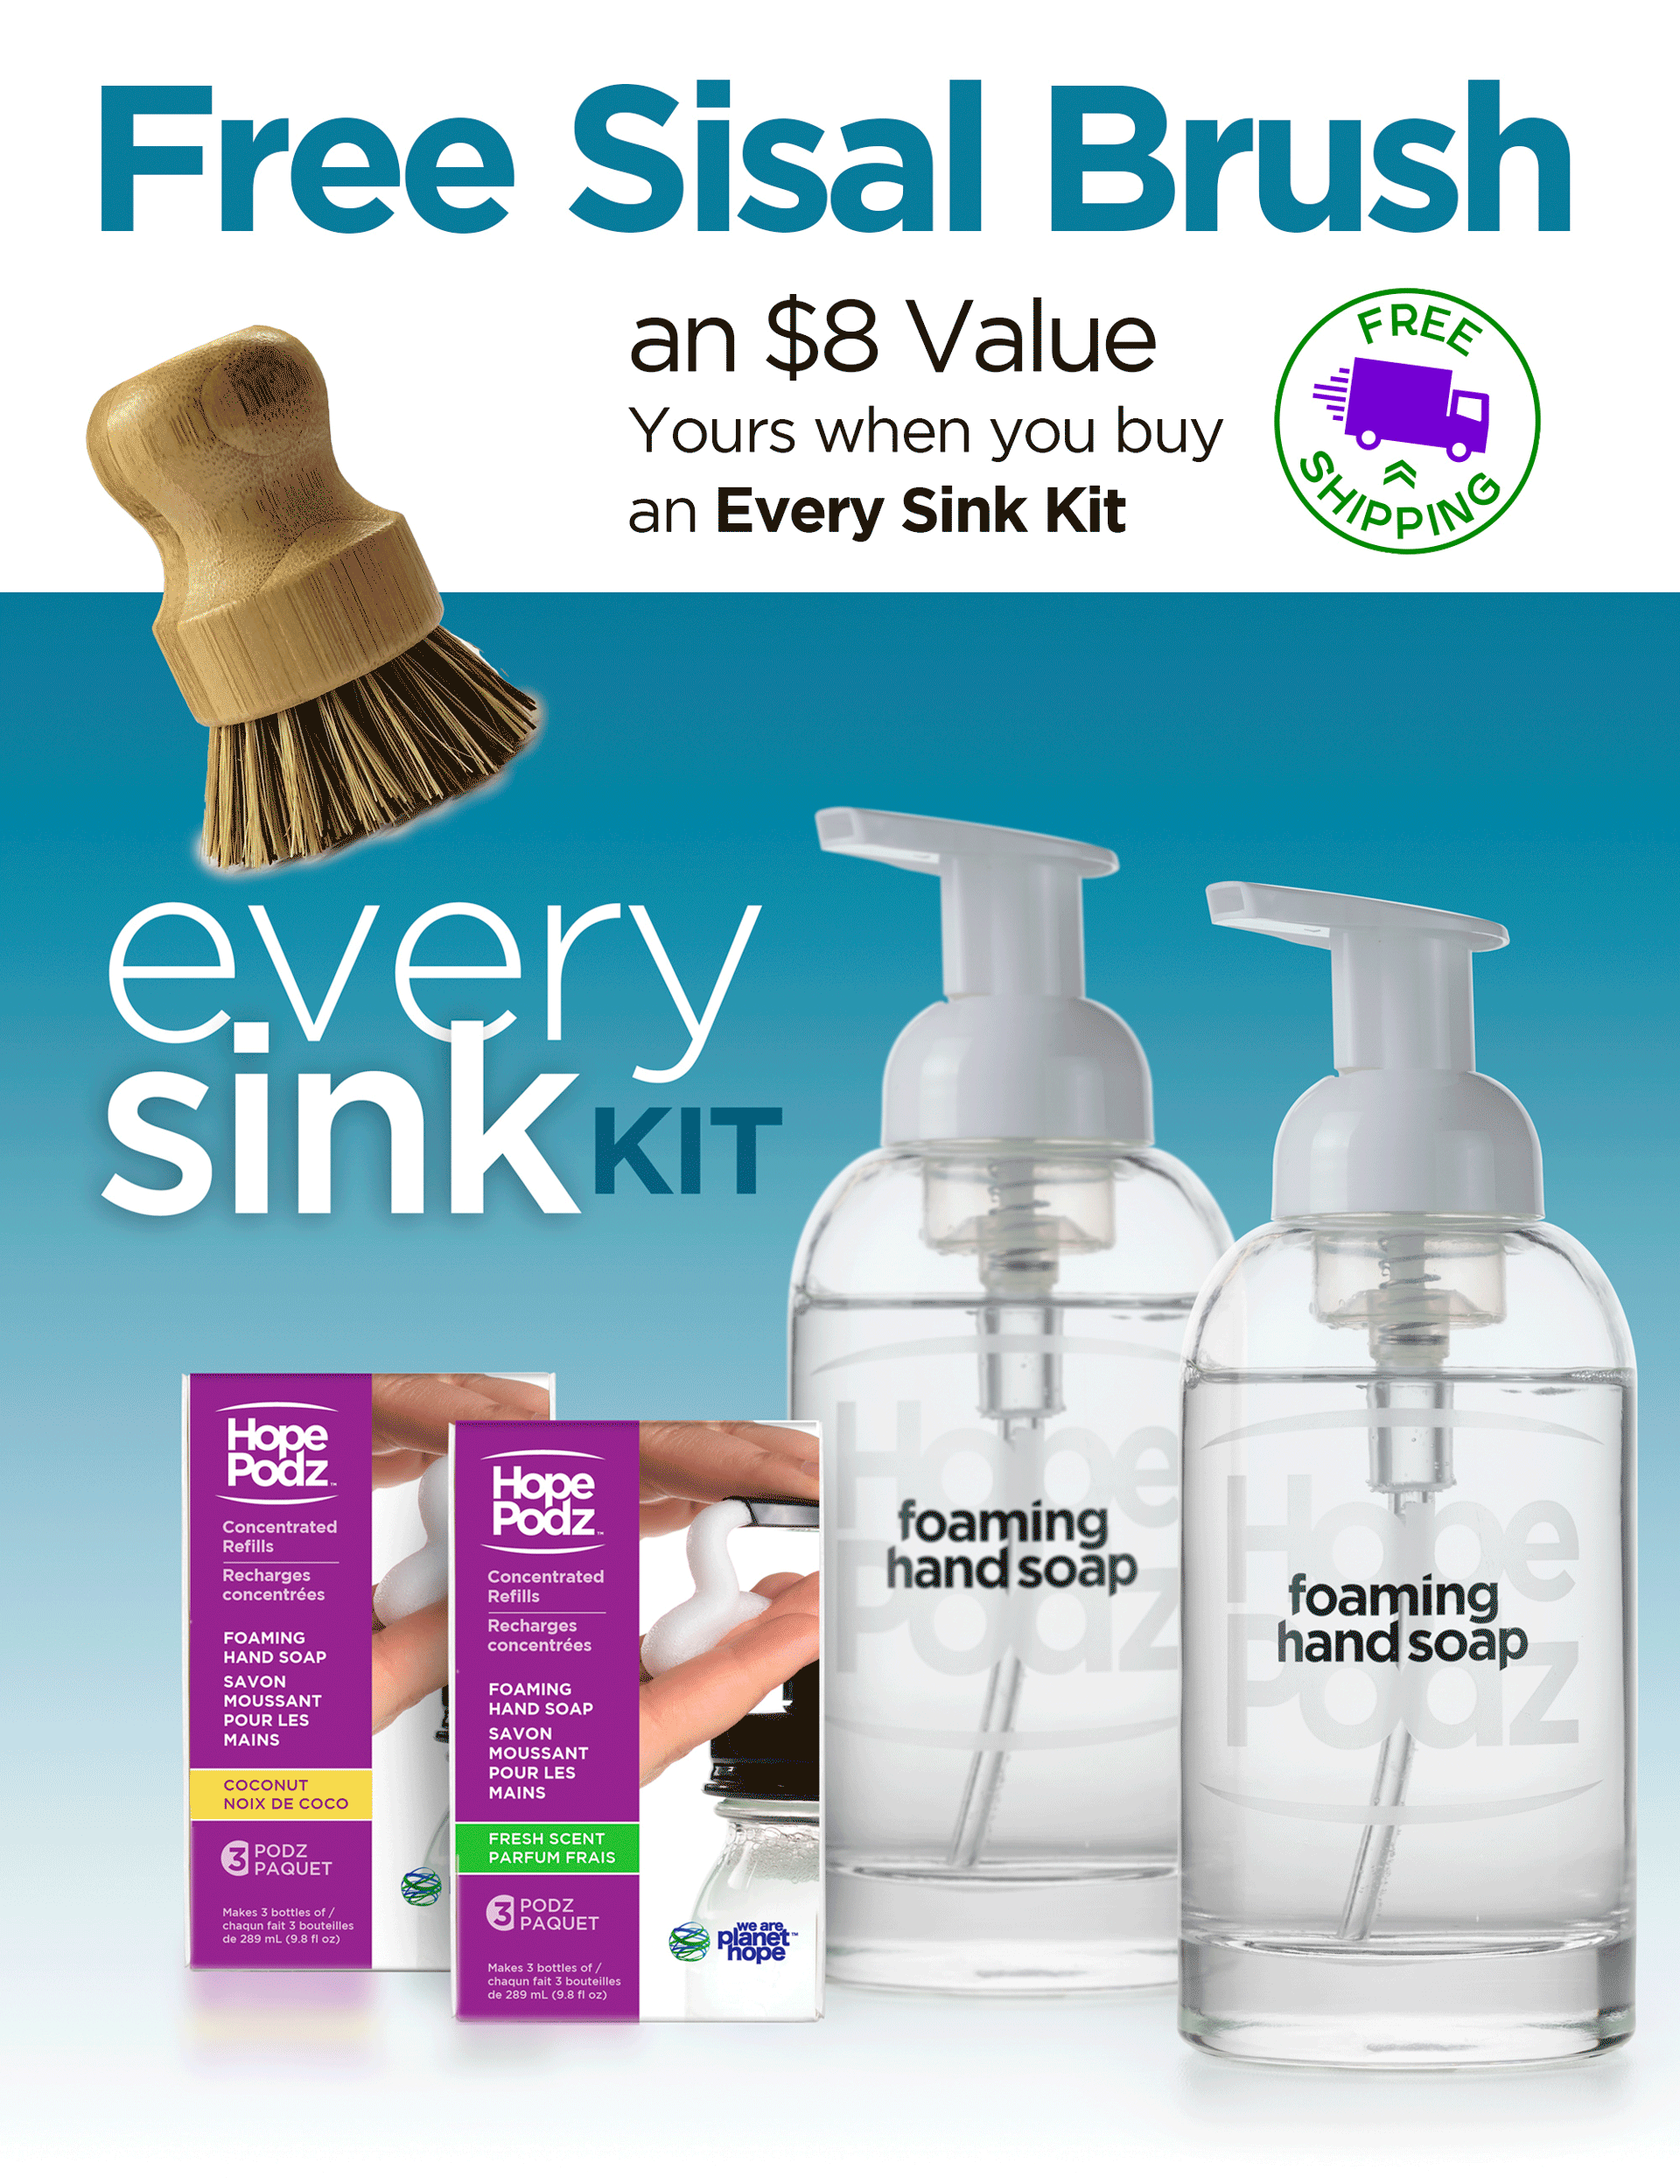 Every-Sink & FREE Sisal Brush WITH DISCOUNT CODE